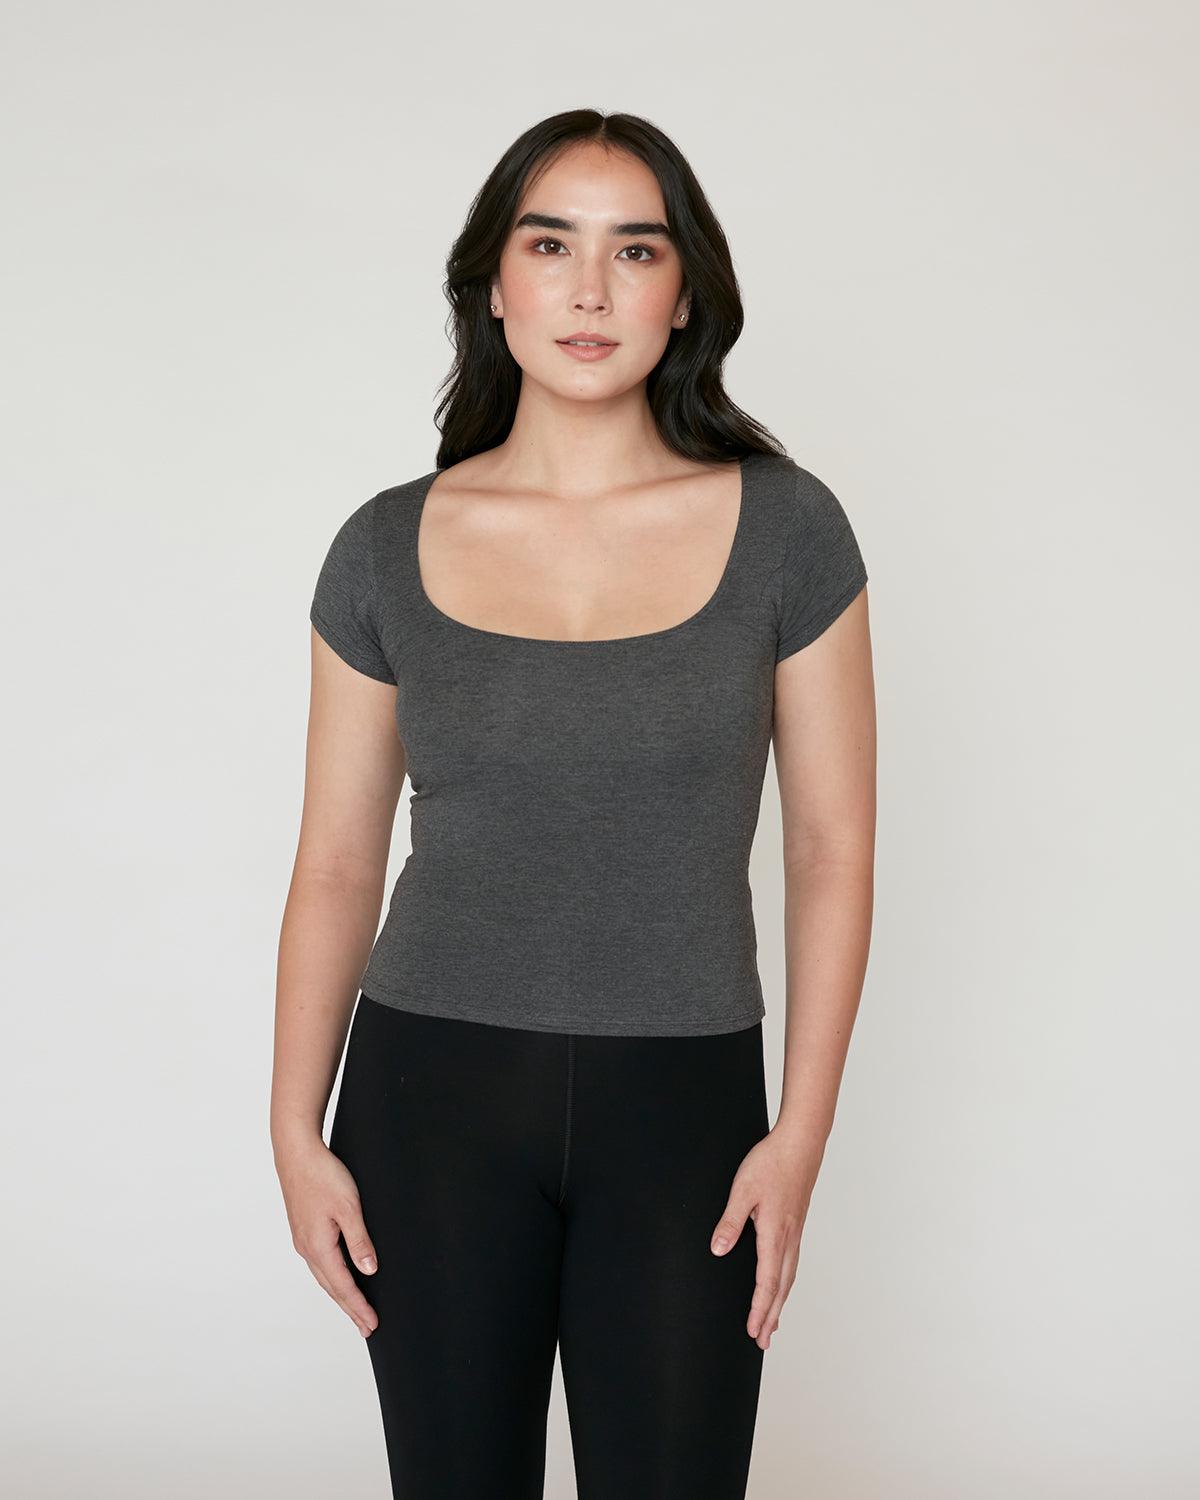 "#color_CHARCOAL| Emi is 5'7.5", wearing a size S